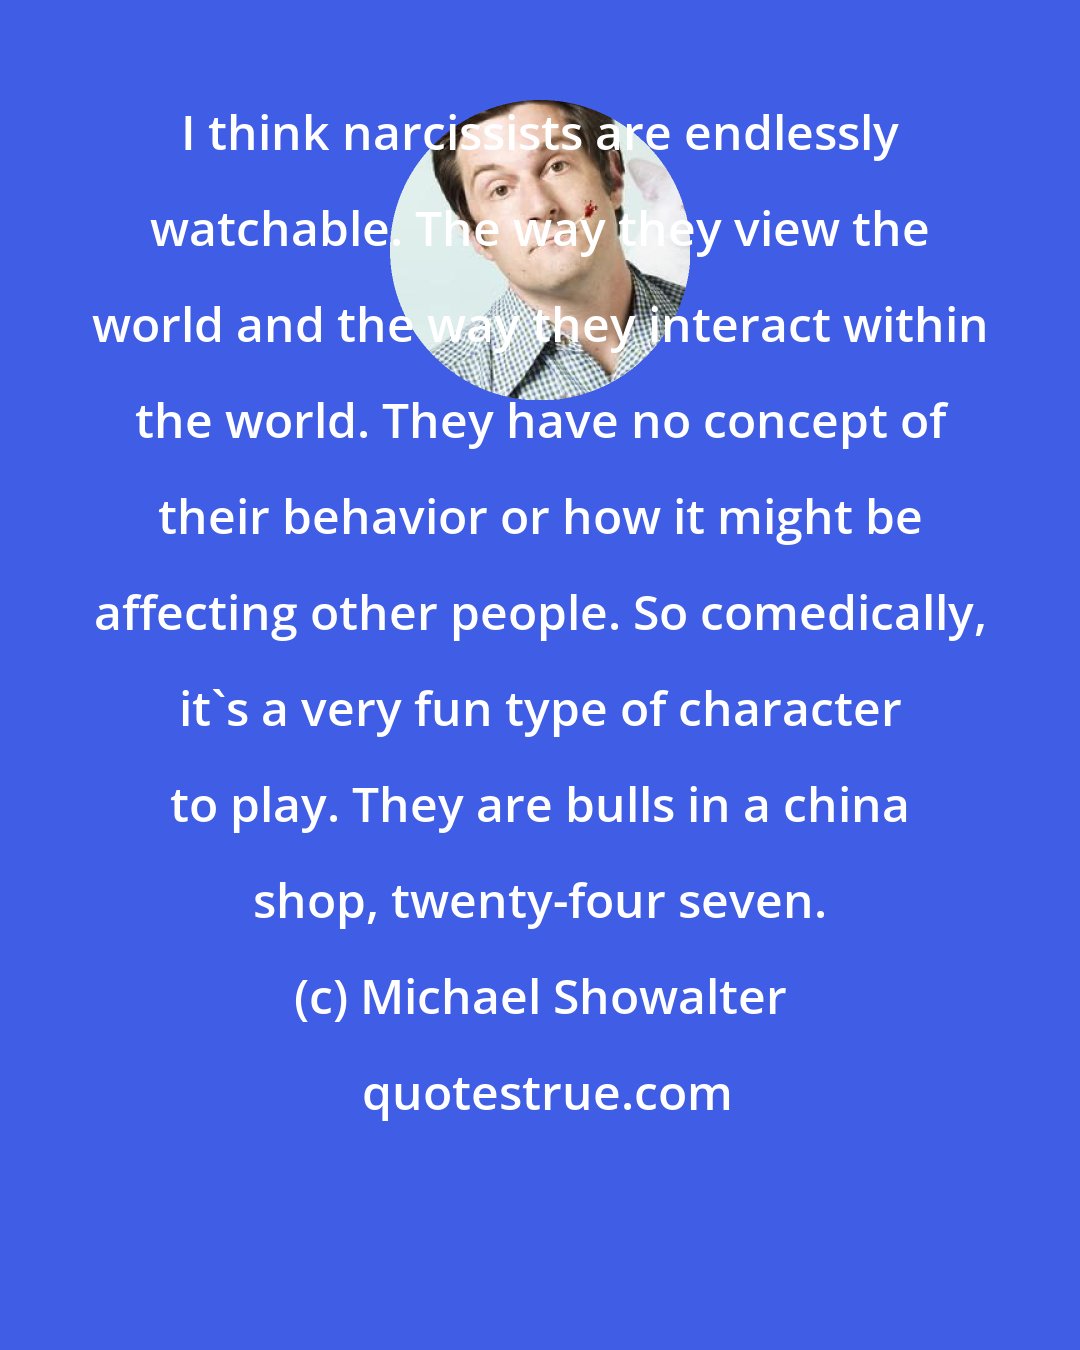 Michael Showalter: I think narcissists are endlessly watchable. The way they view the world and the way they interact within the world. They have no concept of their behavior or how it might be affecting other people. So comedically, it's a very fun type of character to play. They are bulls in a china shop, twenty-four seven.